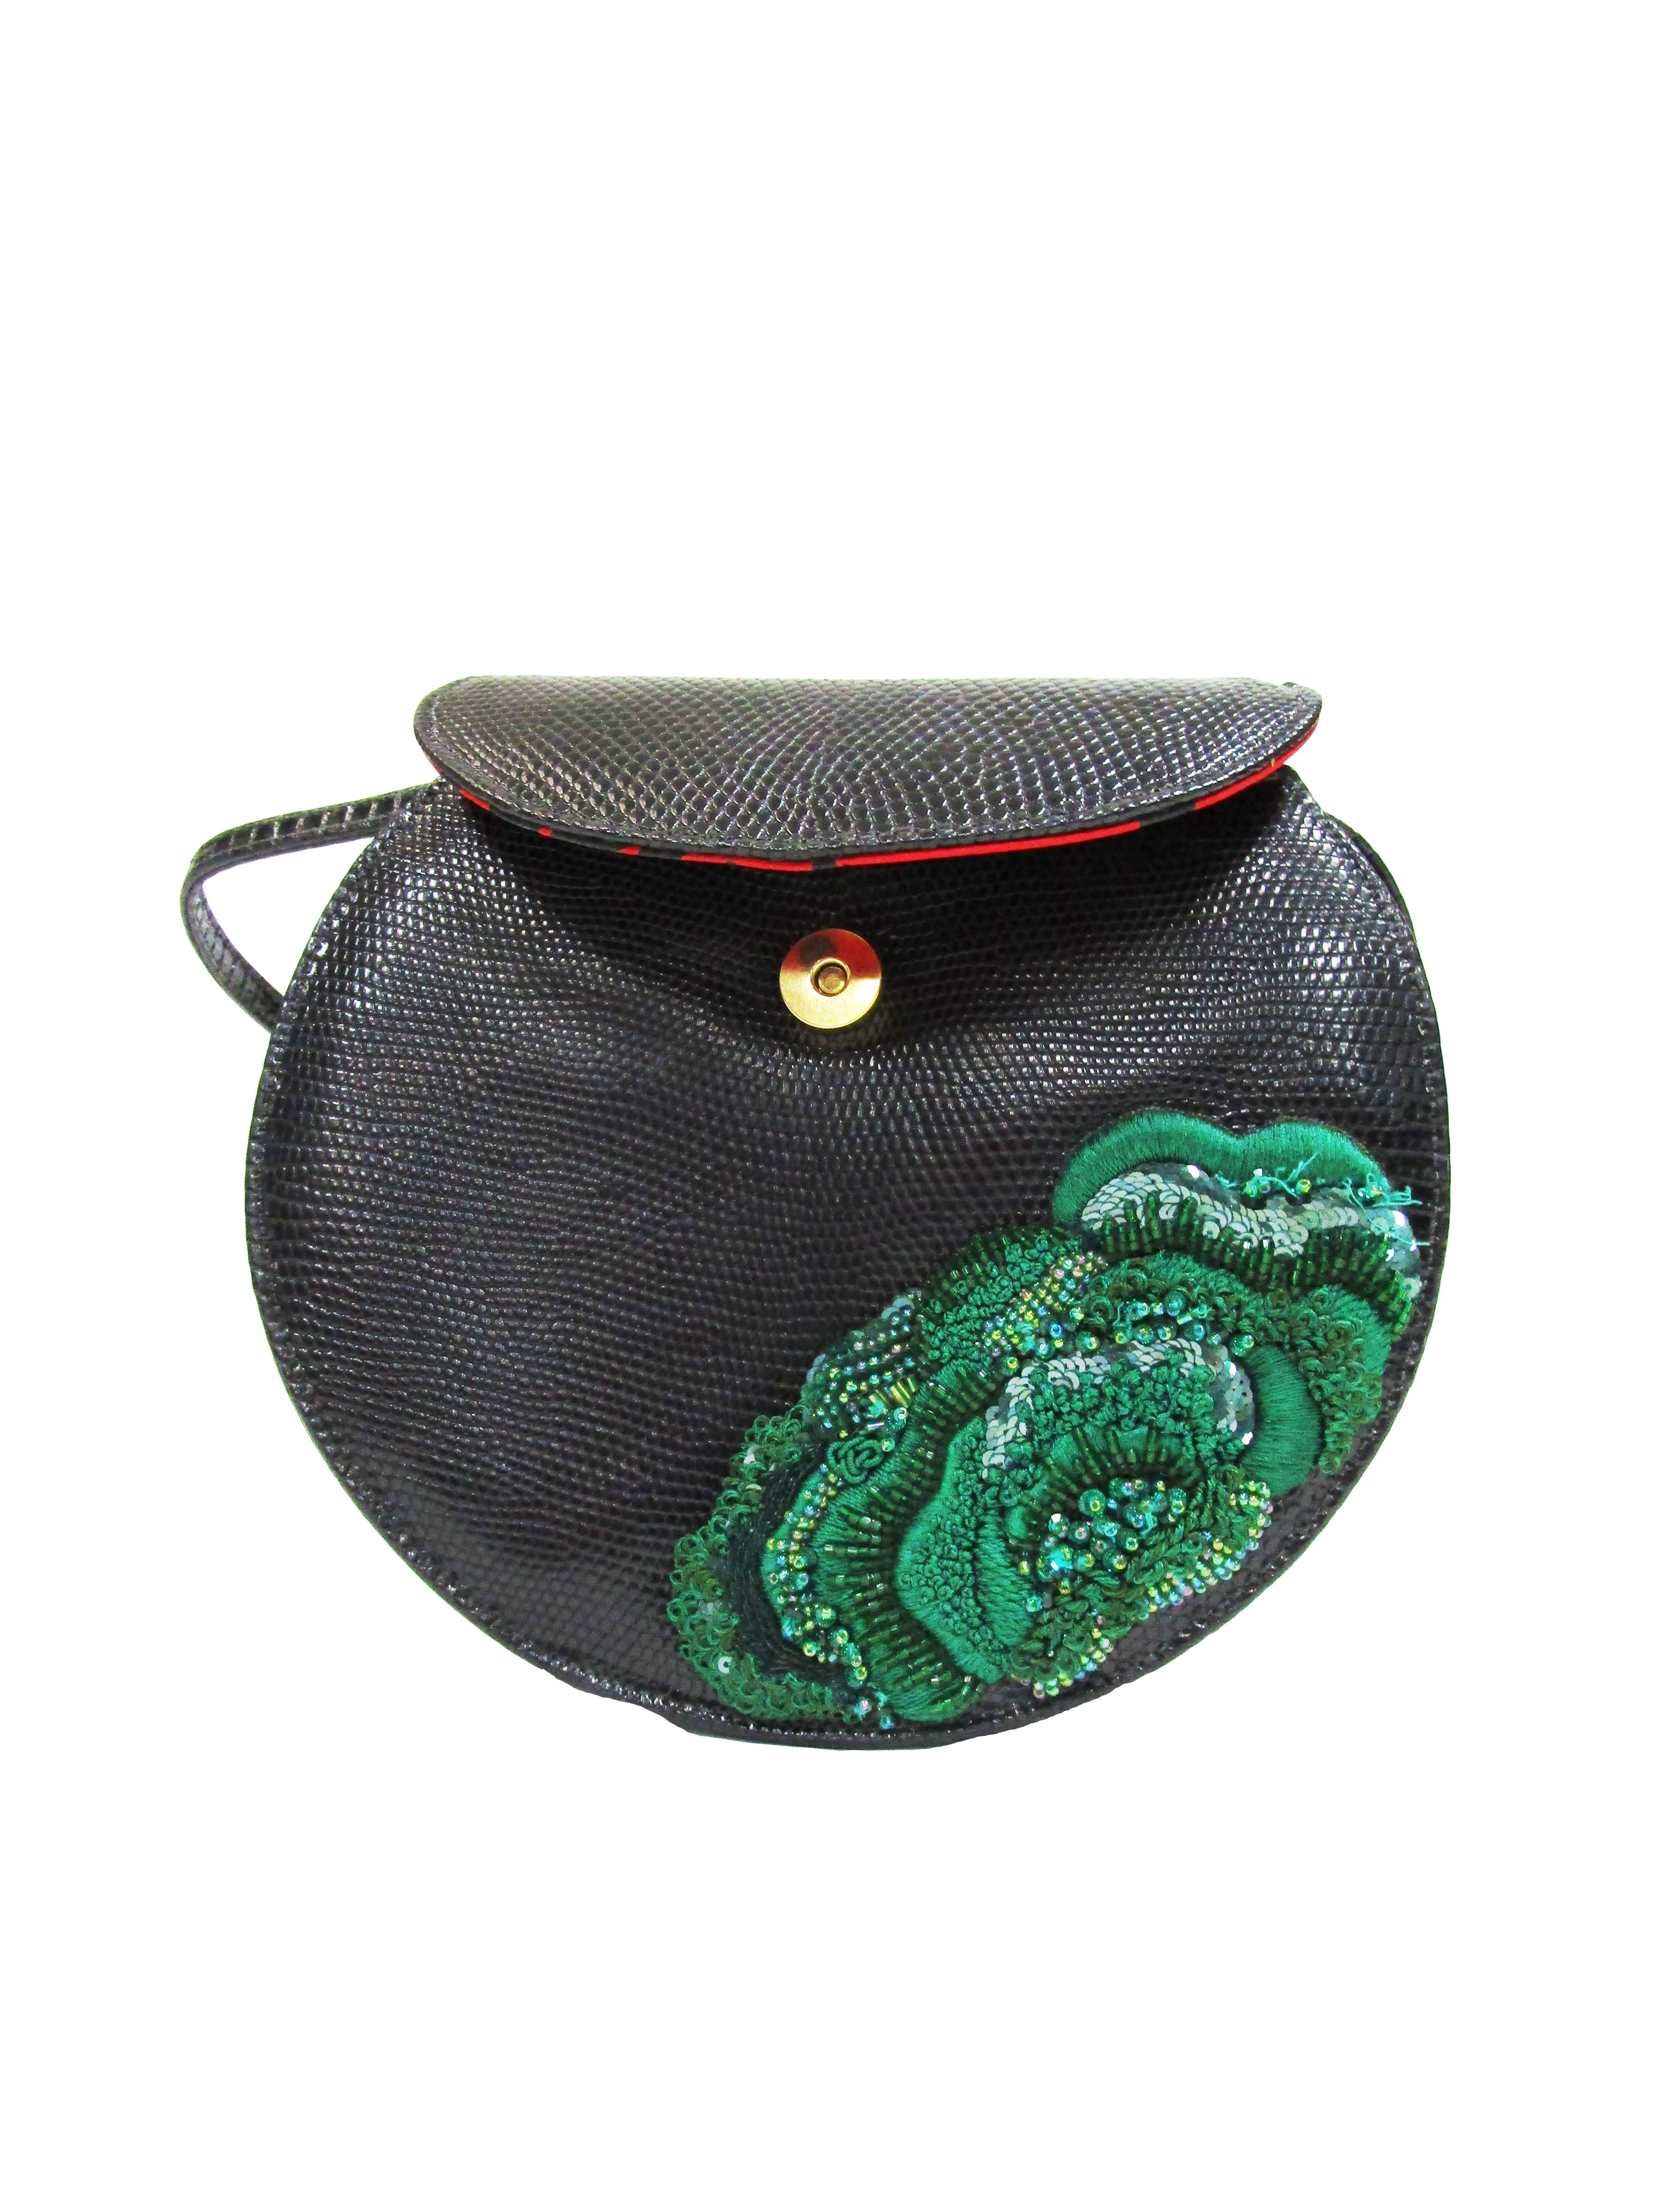 
Spectacularly designed black lizard bag by Geoffrey Beene New York! This evening bag features black lizard with a meticulously embroidered and beaded green flower. The strap lays comfortably across the shoulder and the purse falls right on the hip.